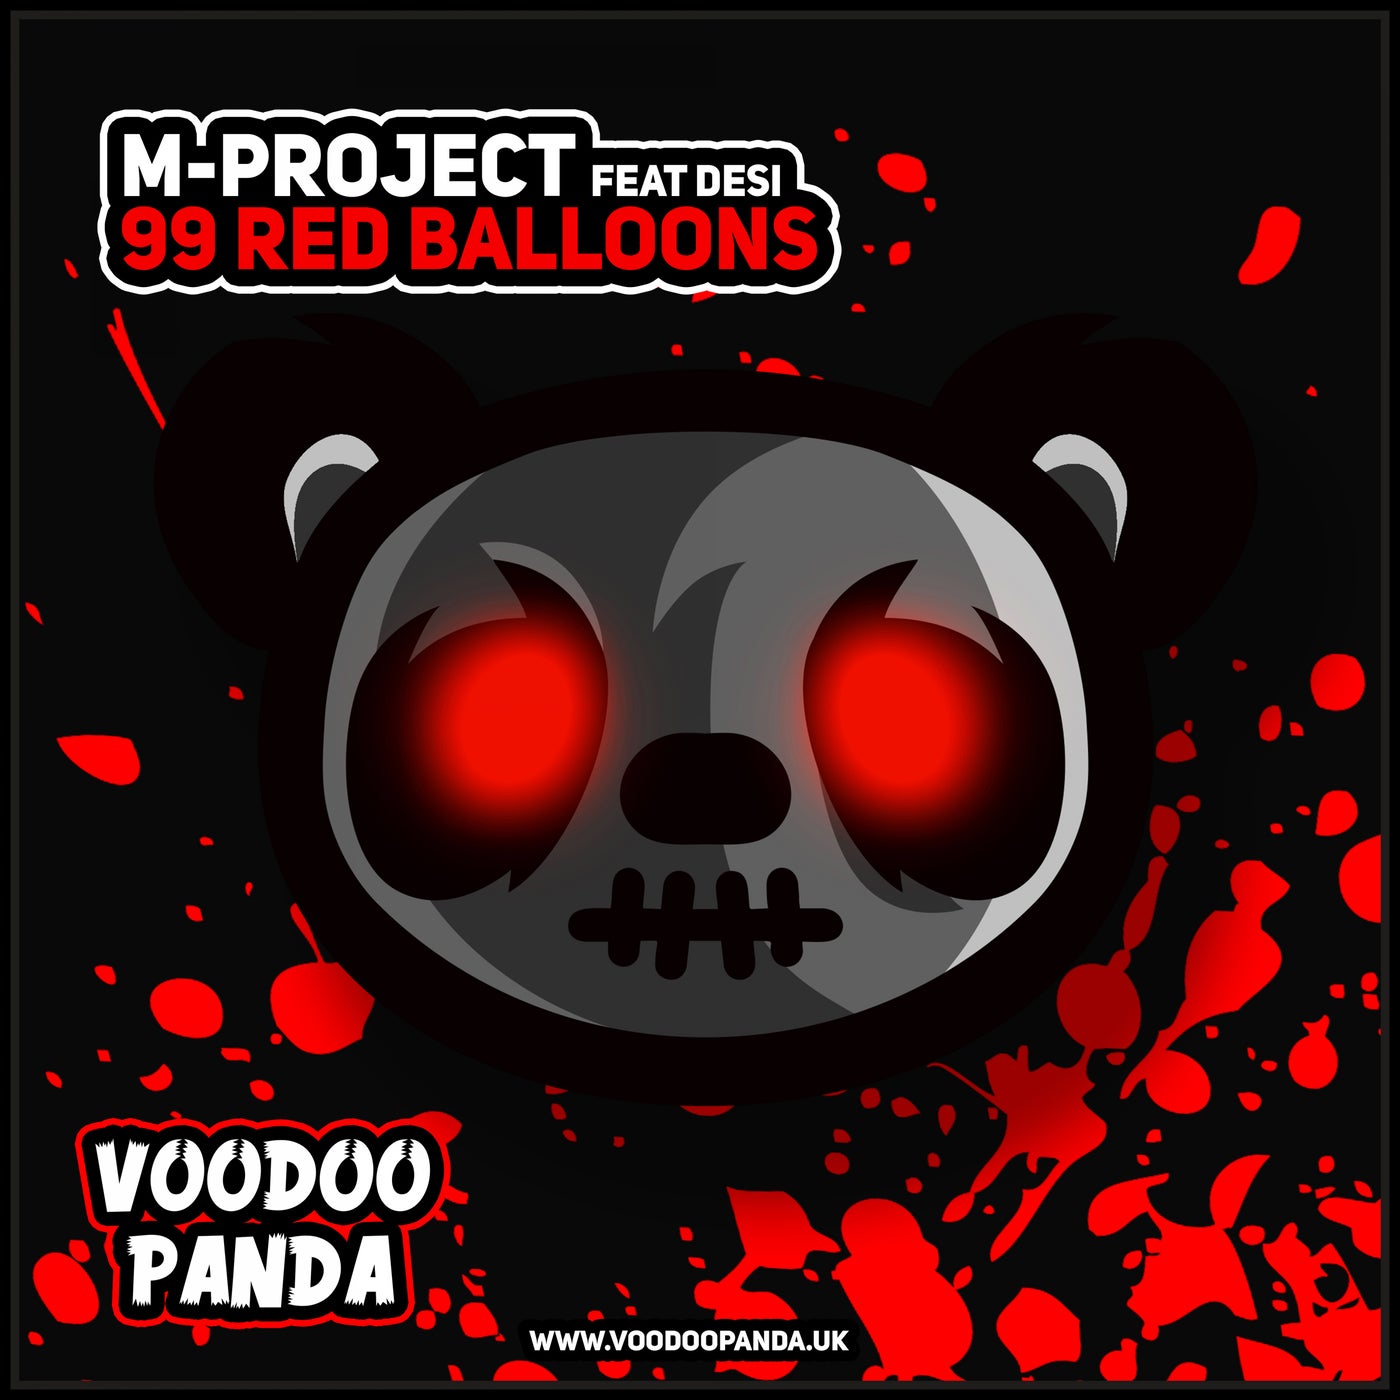 99 Red Balloons